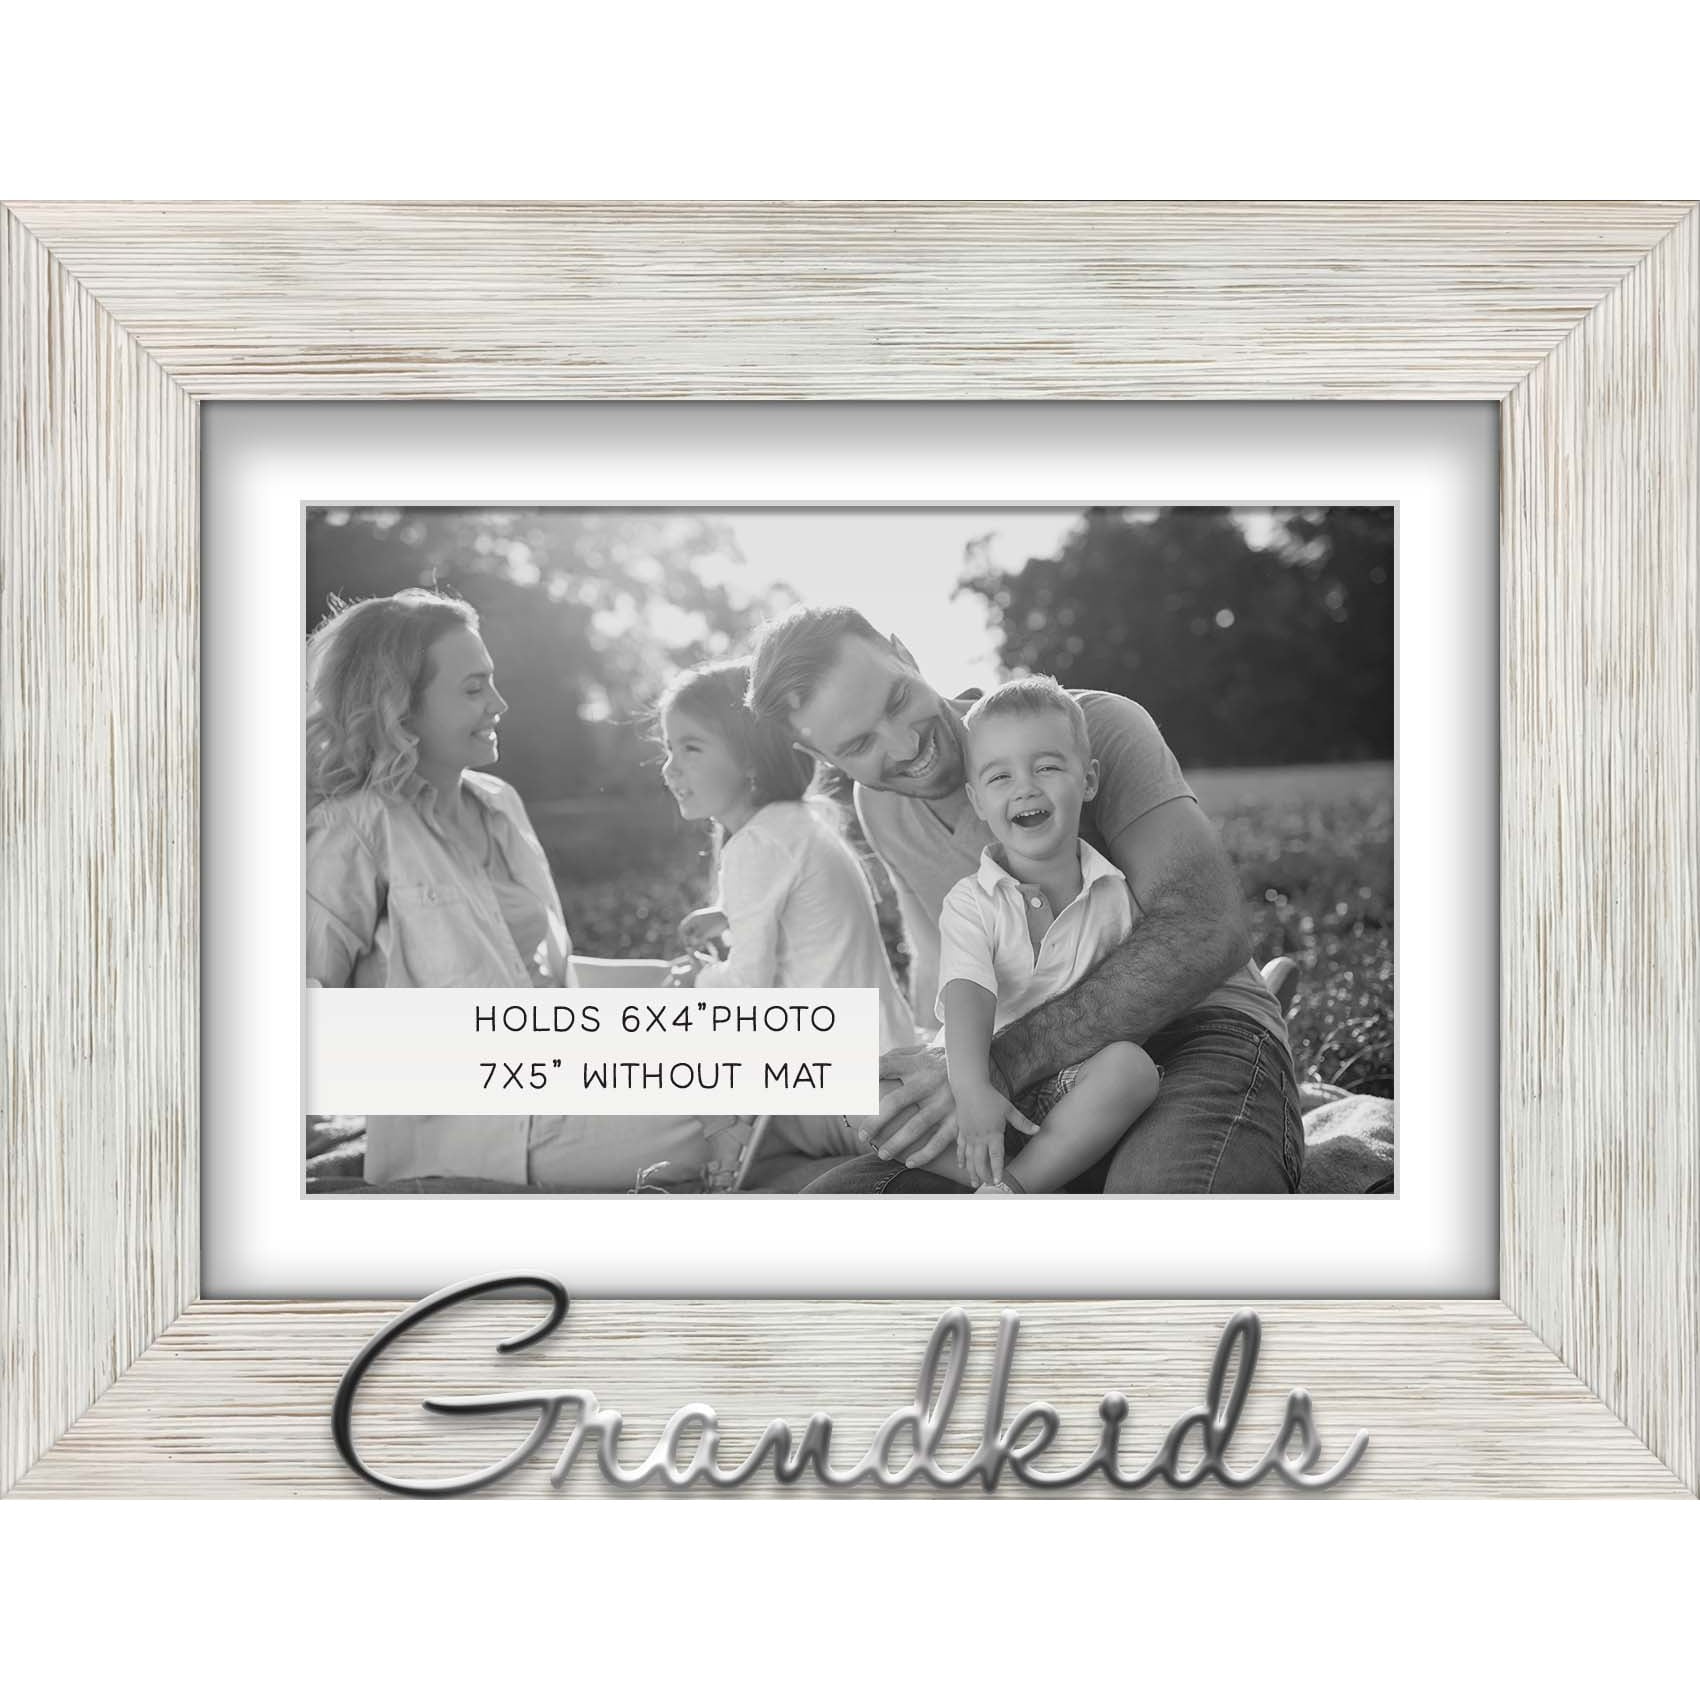 Giftgarden 4x6 Picture Frame Distressed Beige White Set of 12, Multi Rustic  Wood Grain 4 by 6 Photo Frames Bulk for Wall or Tabletop Display